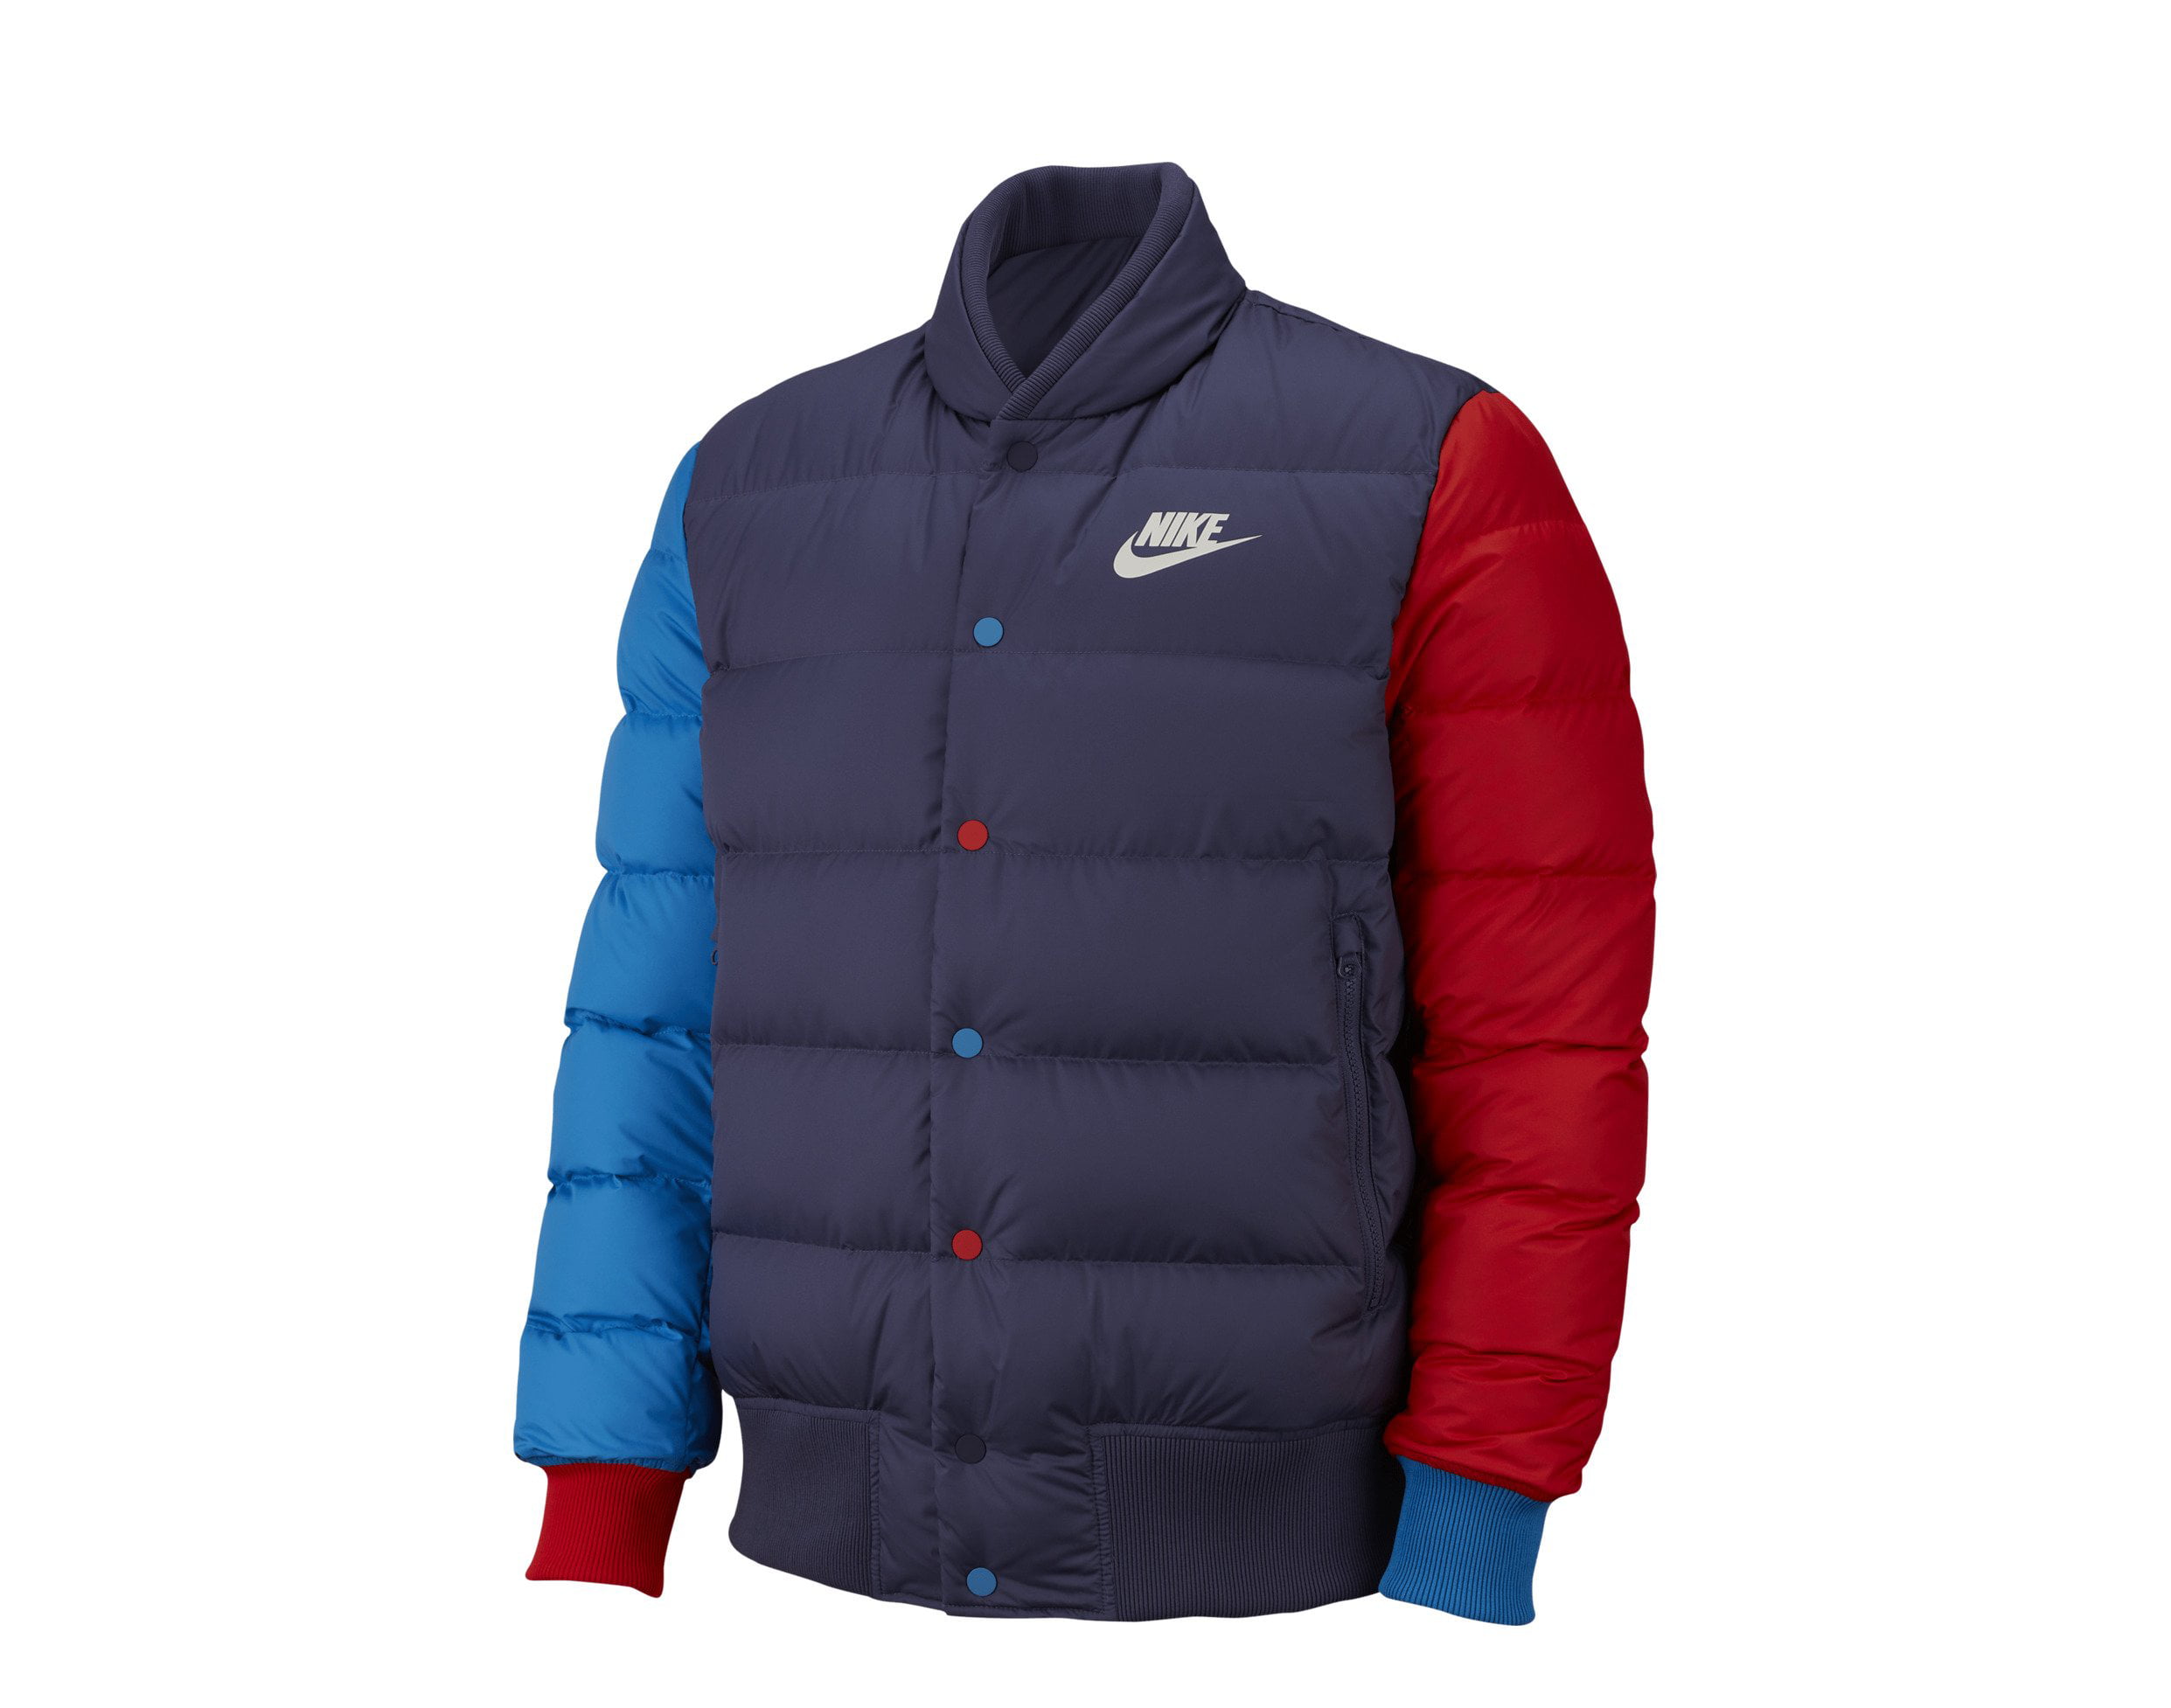 jackets nike red